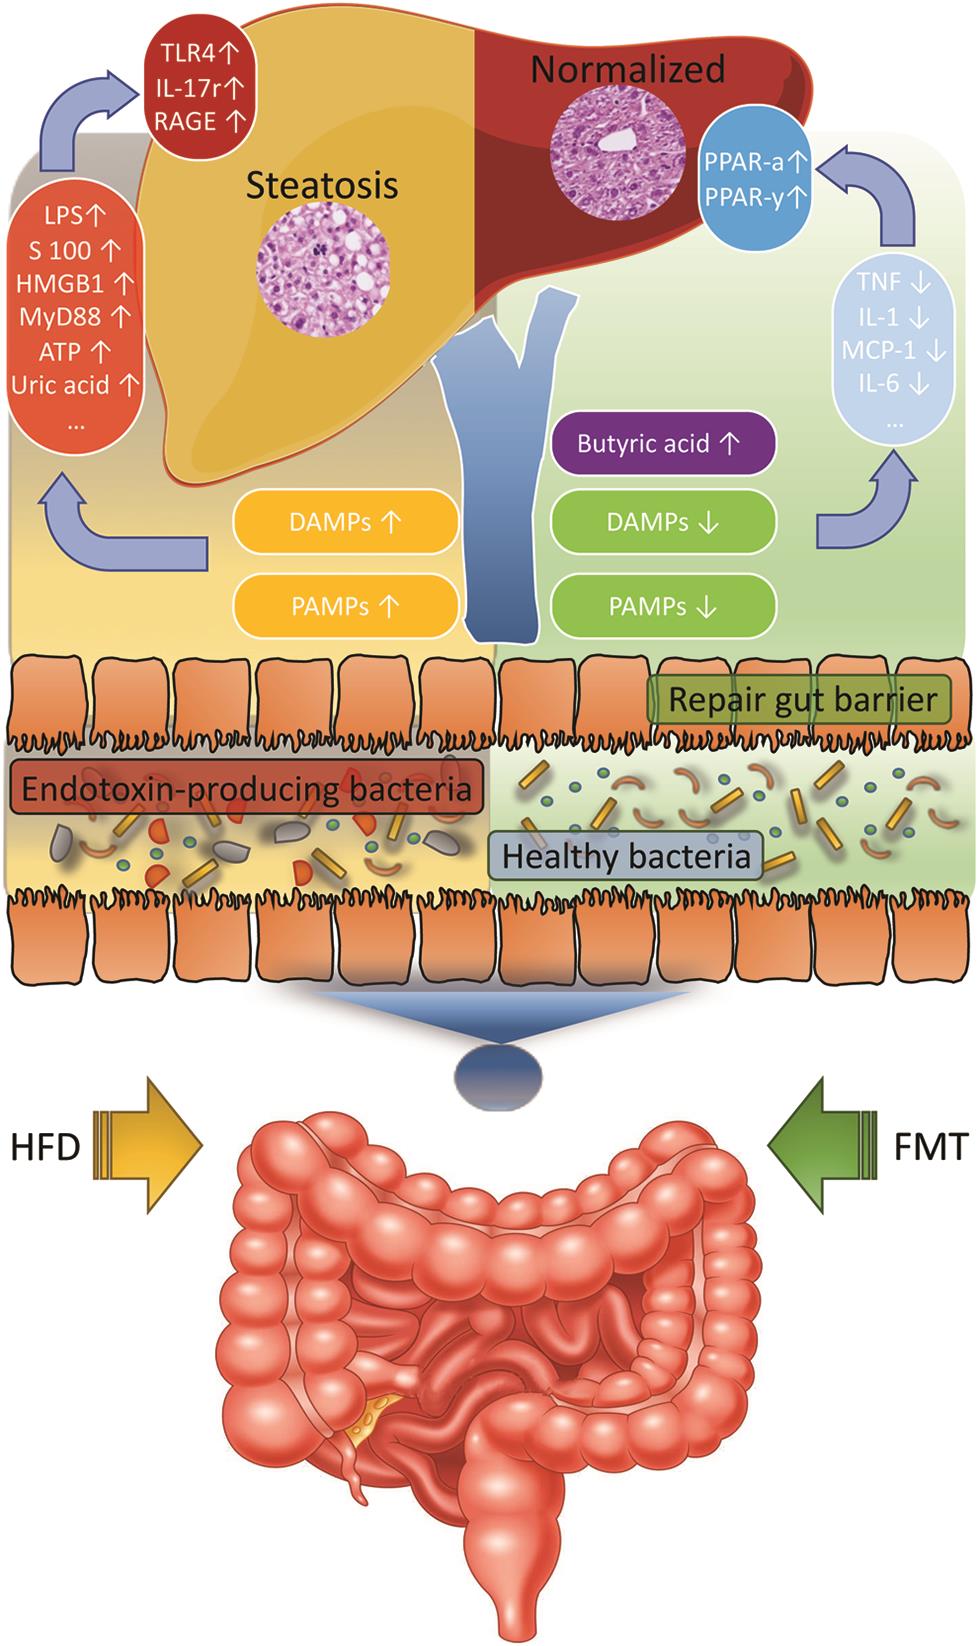 Proposed molecular mechanism of FMT for the treatment of NAFLD.